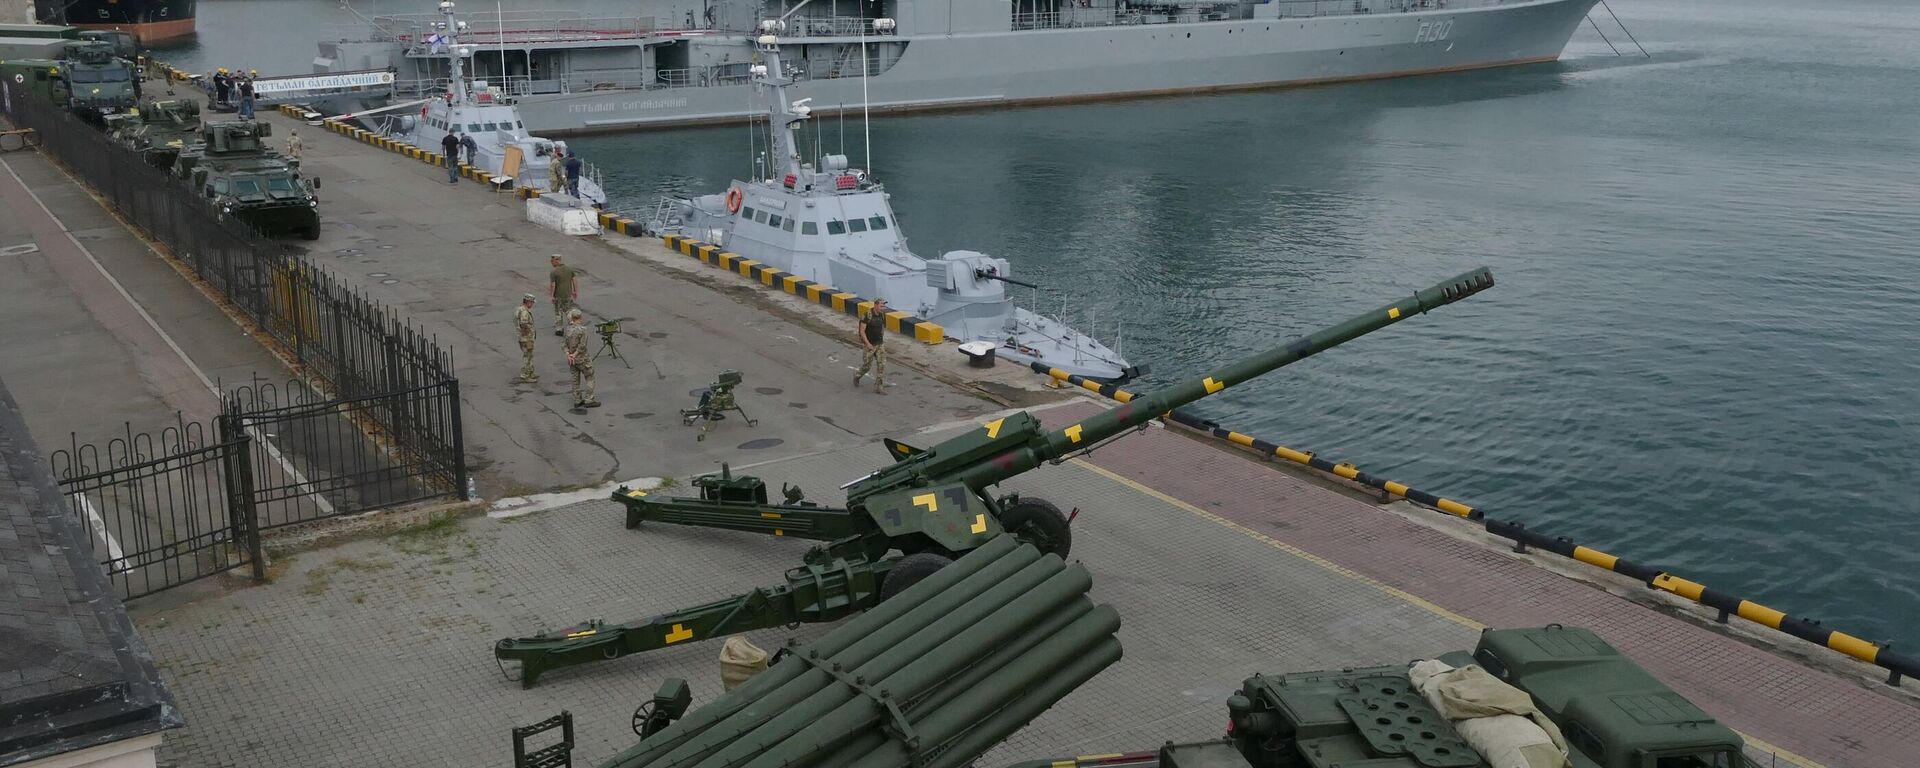 Military equipment at the Sea Breeze 2019 exercises in Odessa's port. File photo. - Sputnik International, 1920, 23.04.2022